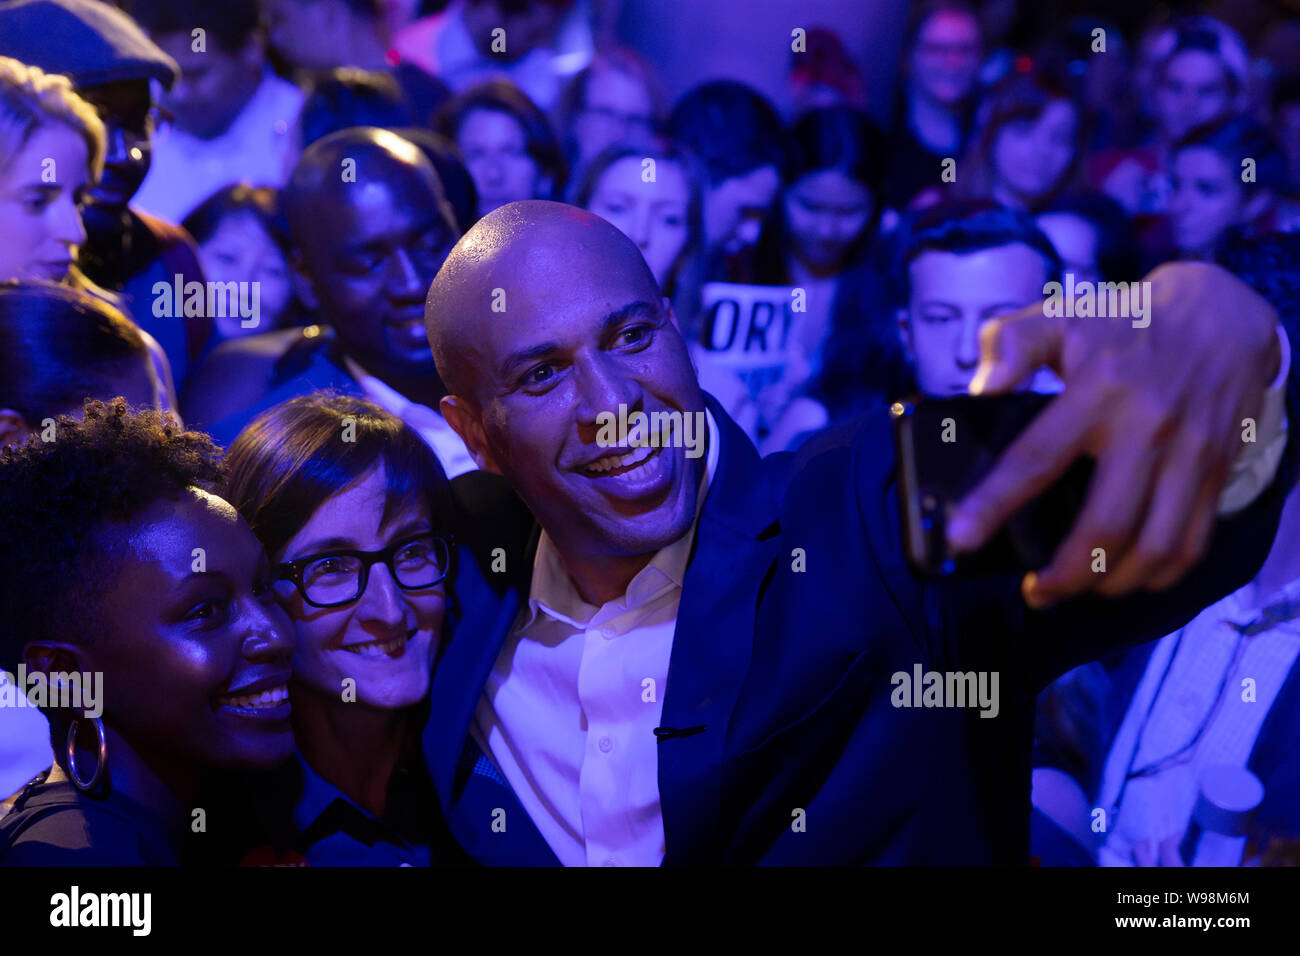 New York, NY - August 12, 2019: Democratic presidential candidate US Senator Cory Booker poses for photos with supporters at campaign grassroots Happy Hour fundraiser event at the nightclub Slate Stock Photo